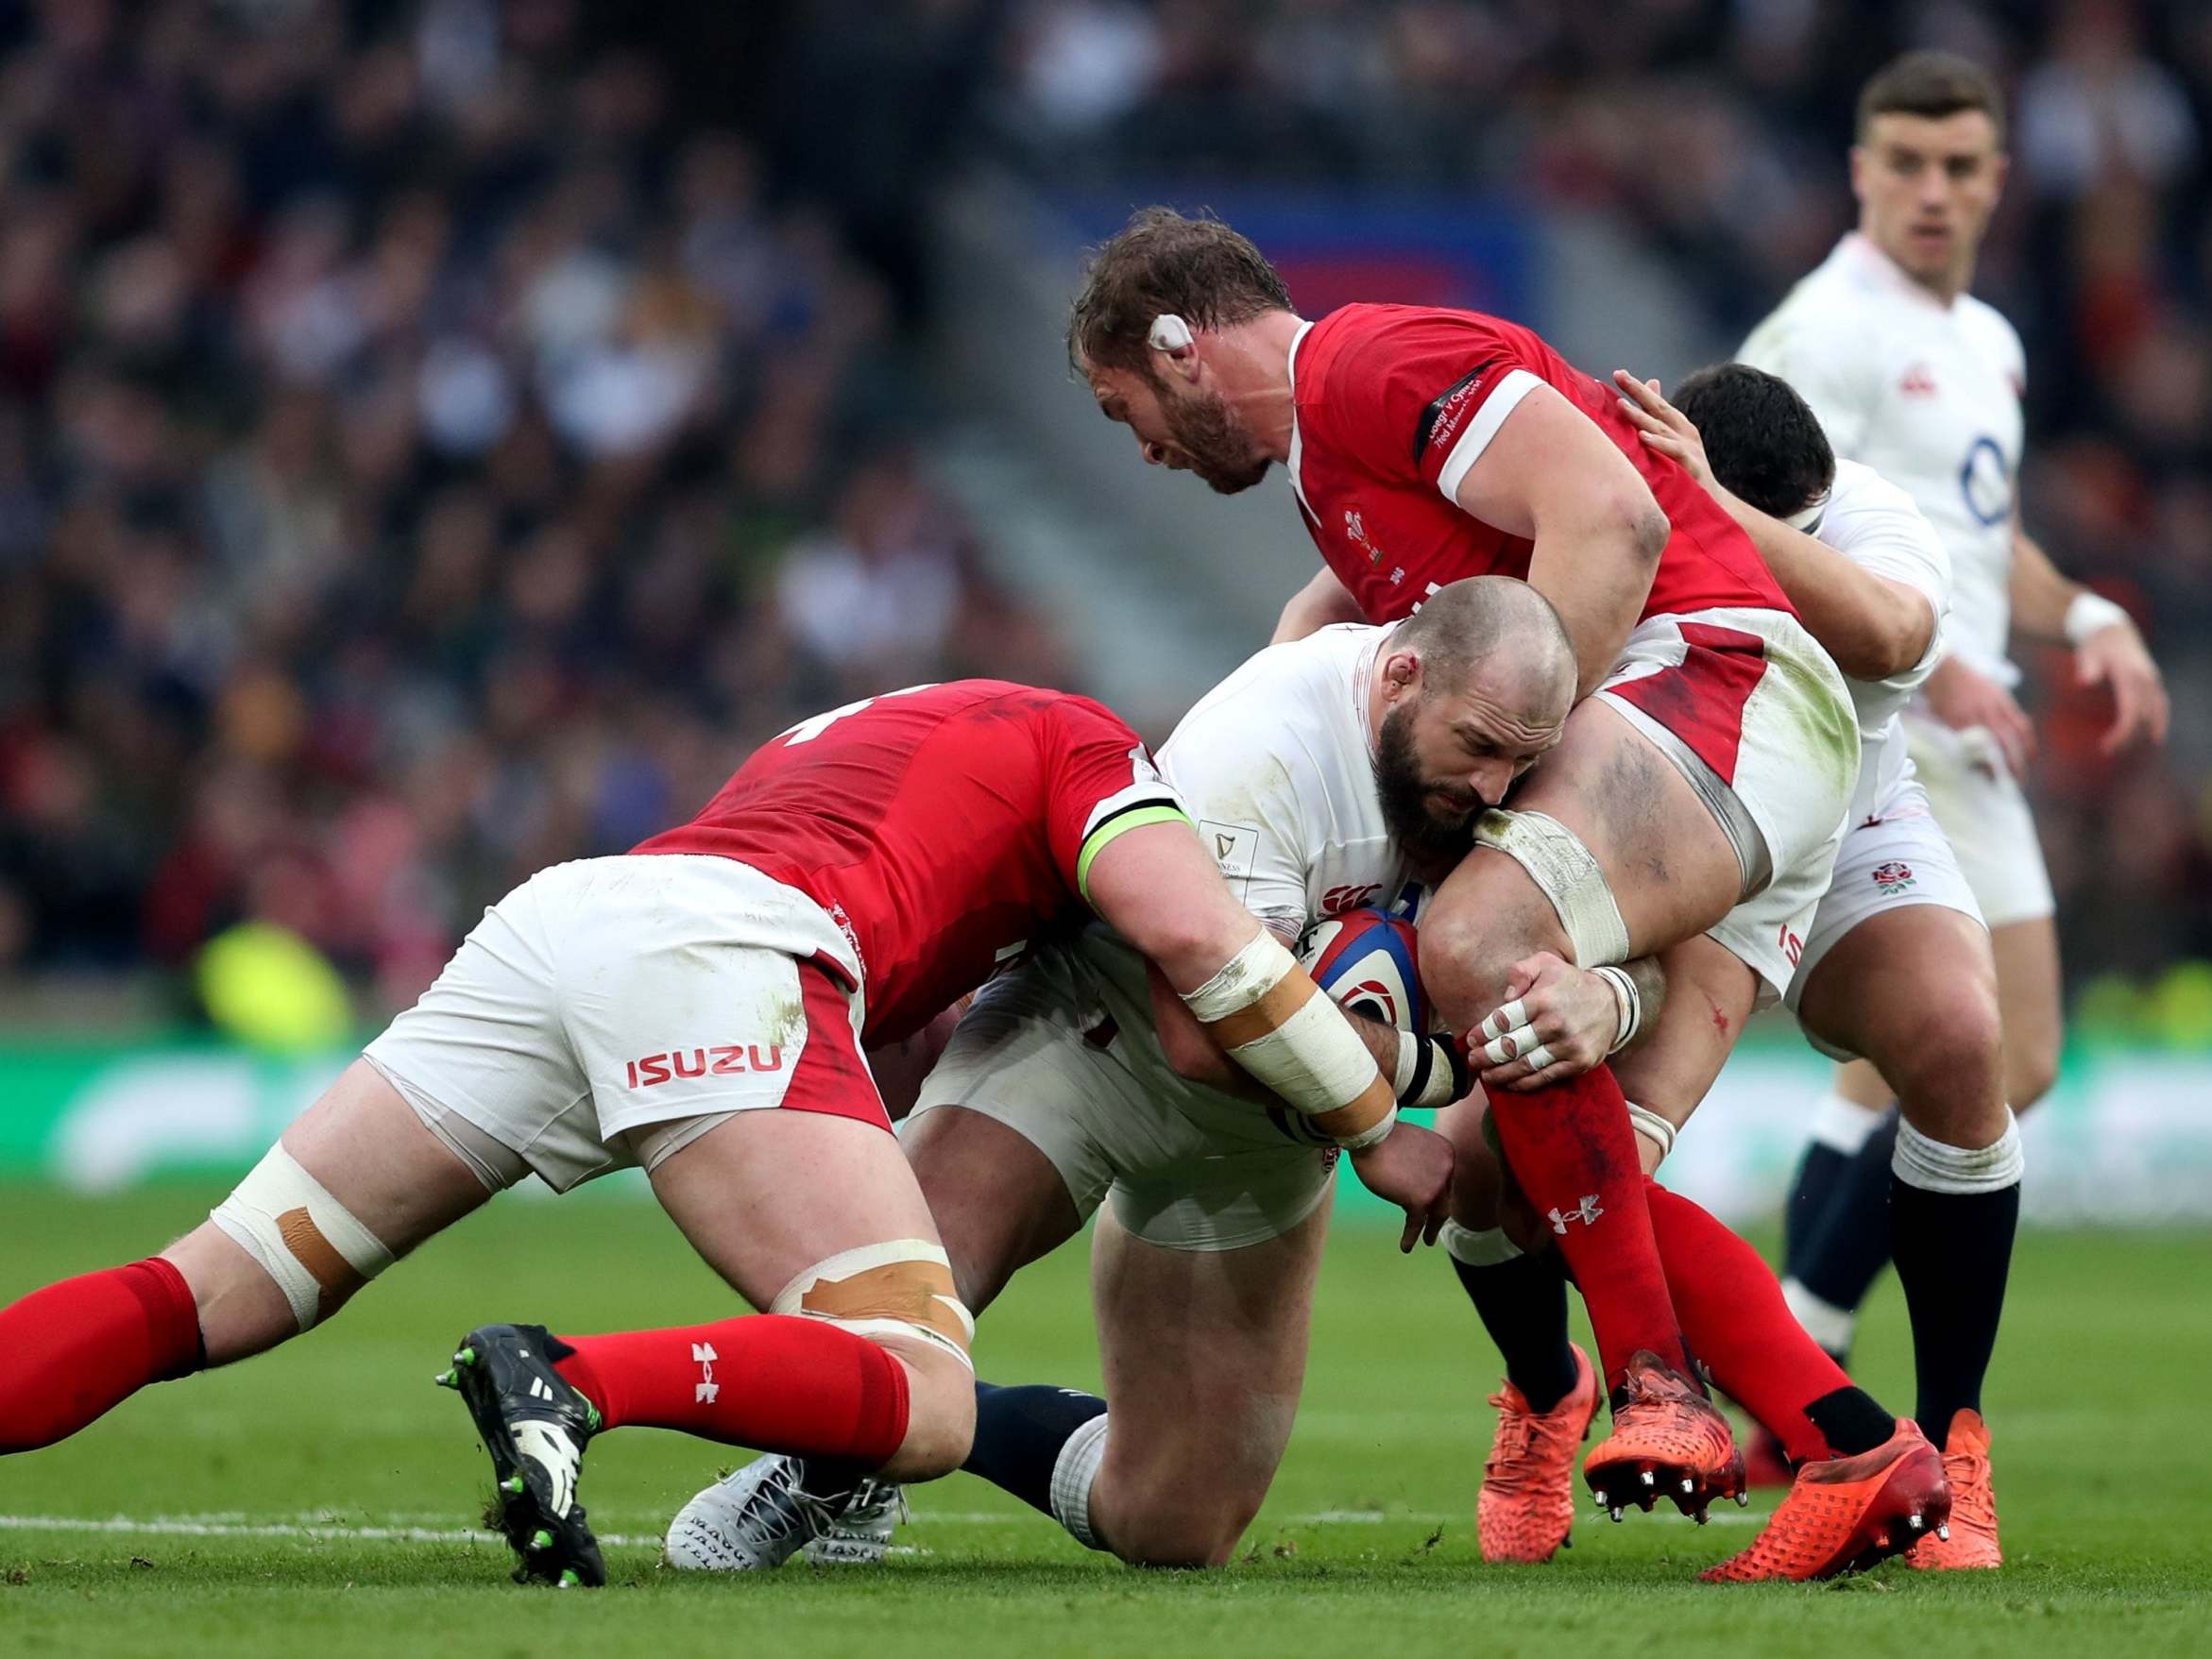 Marler was involved in an incident with Jones that landed himself a 10-game ban